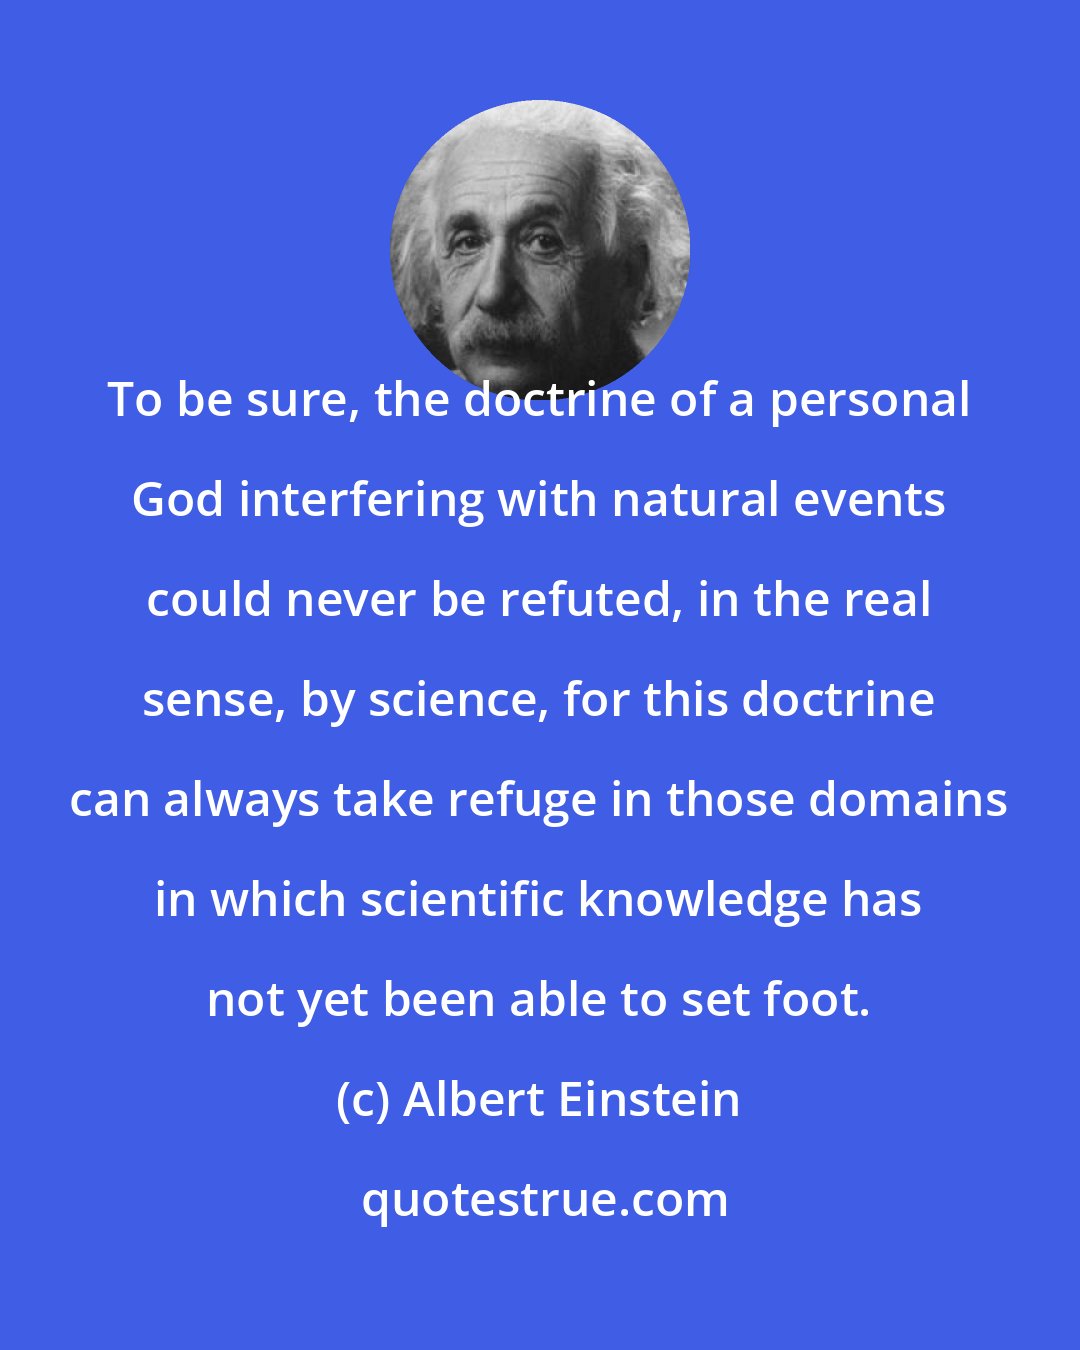 Albert Einstein: To be sure, the doctrine of a personal God interfering with natural events could never be refuted, in the real sense, by science, for this doctrine can always take refuge in those domains in which scientific knowledge has not yet been able to set foot.